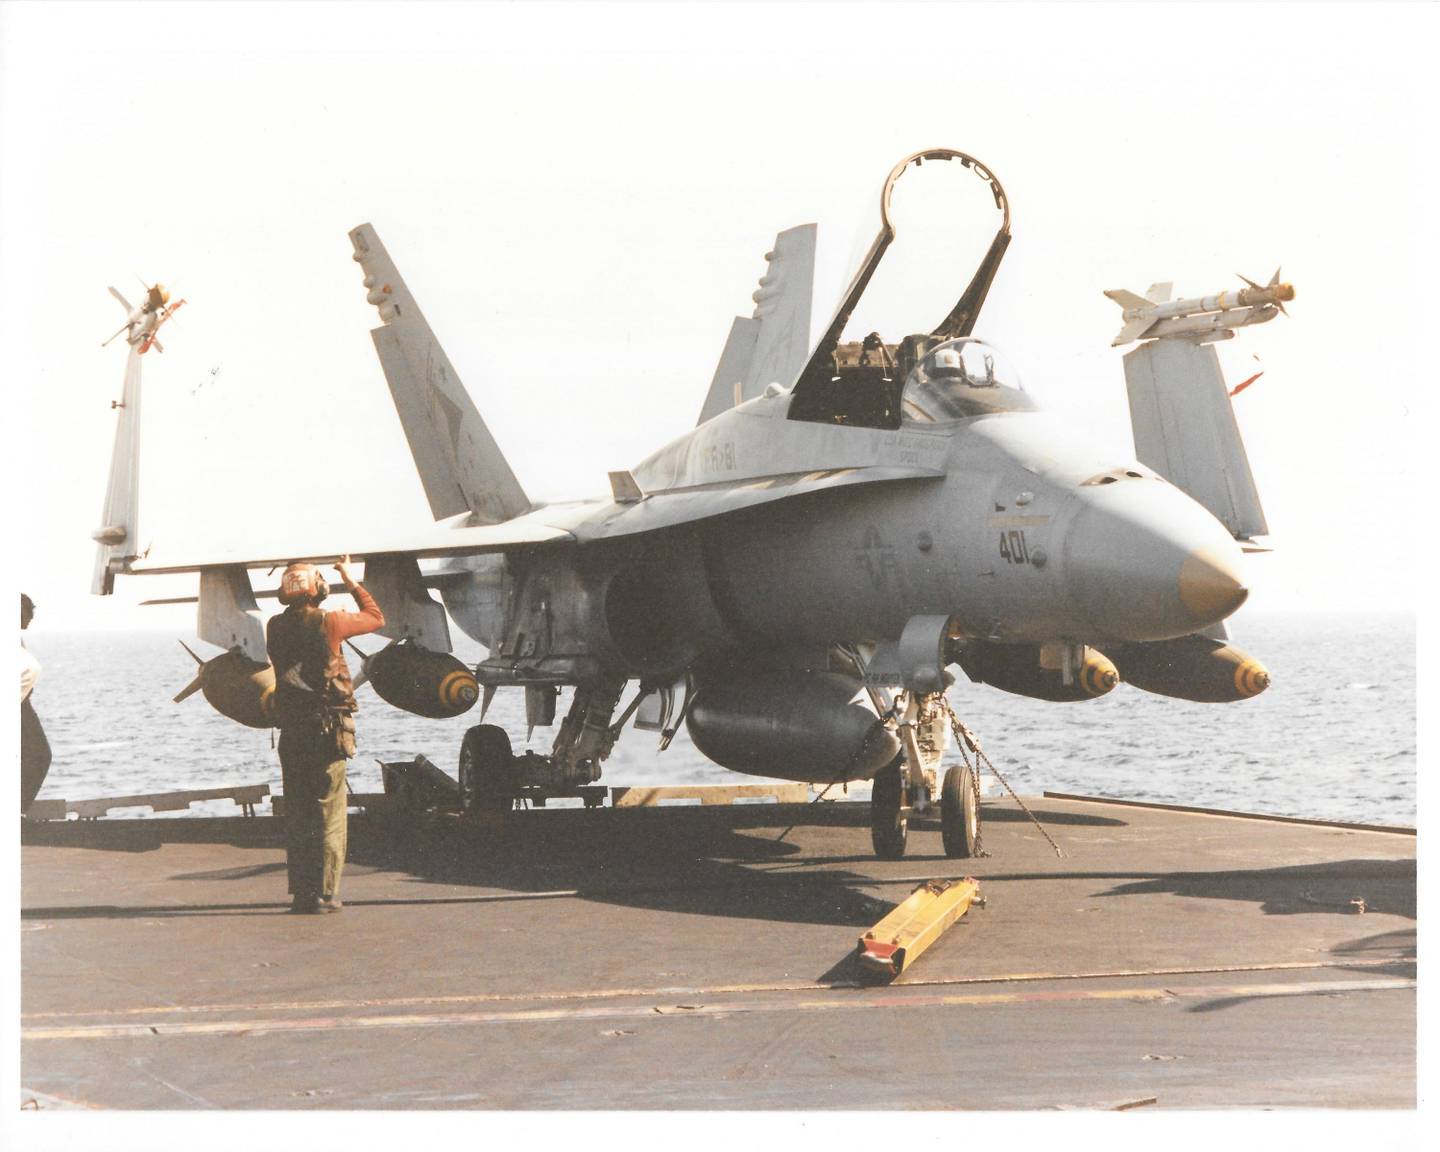 Fox’s F/A-18 aboard the USS Saratoga before launching. The MiG profile above the side number on the nose shows it has had one confirmed kill—on Jan. 17, 1991.